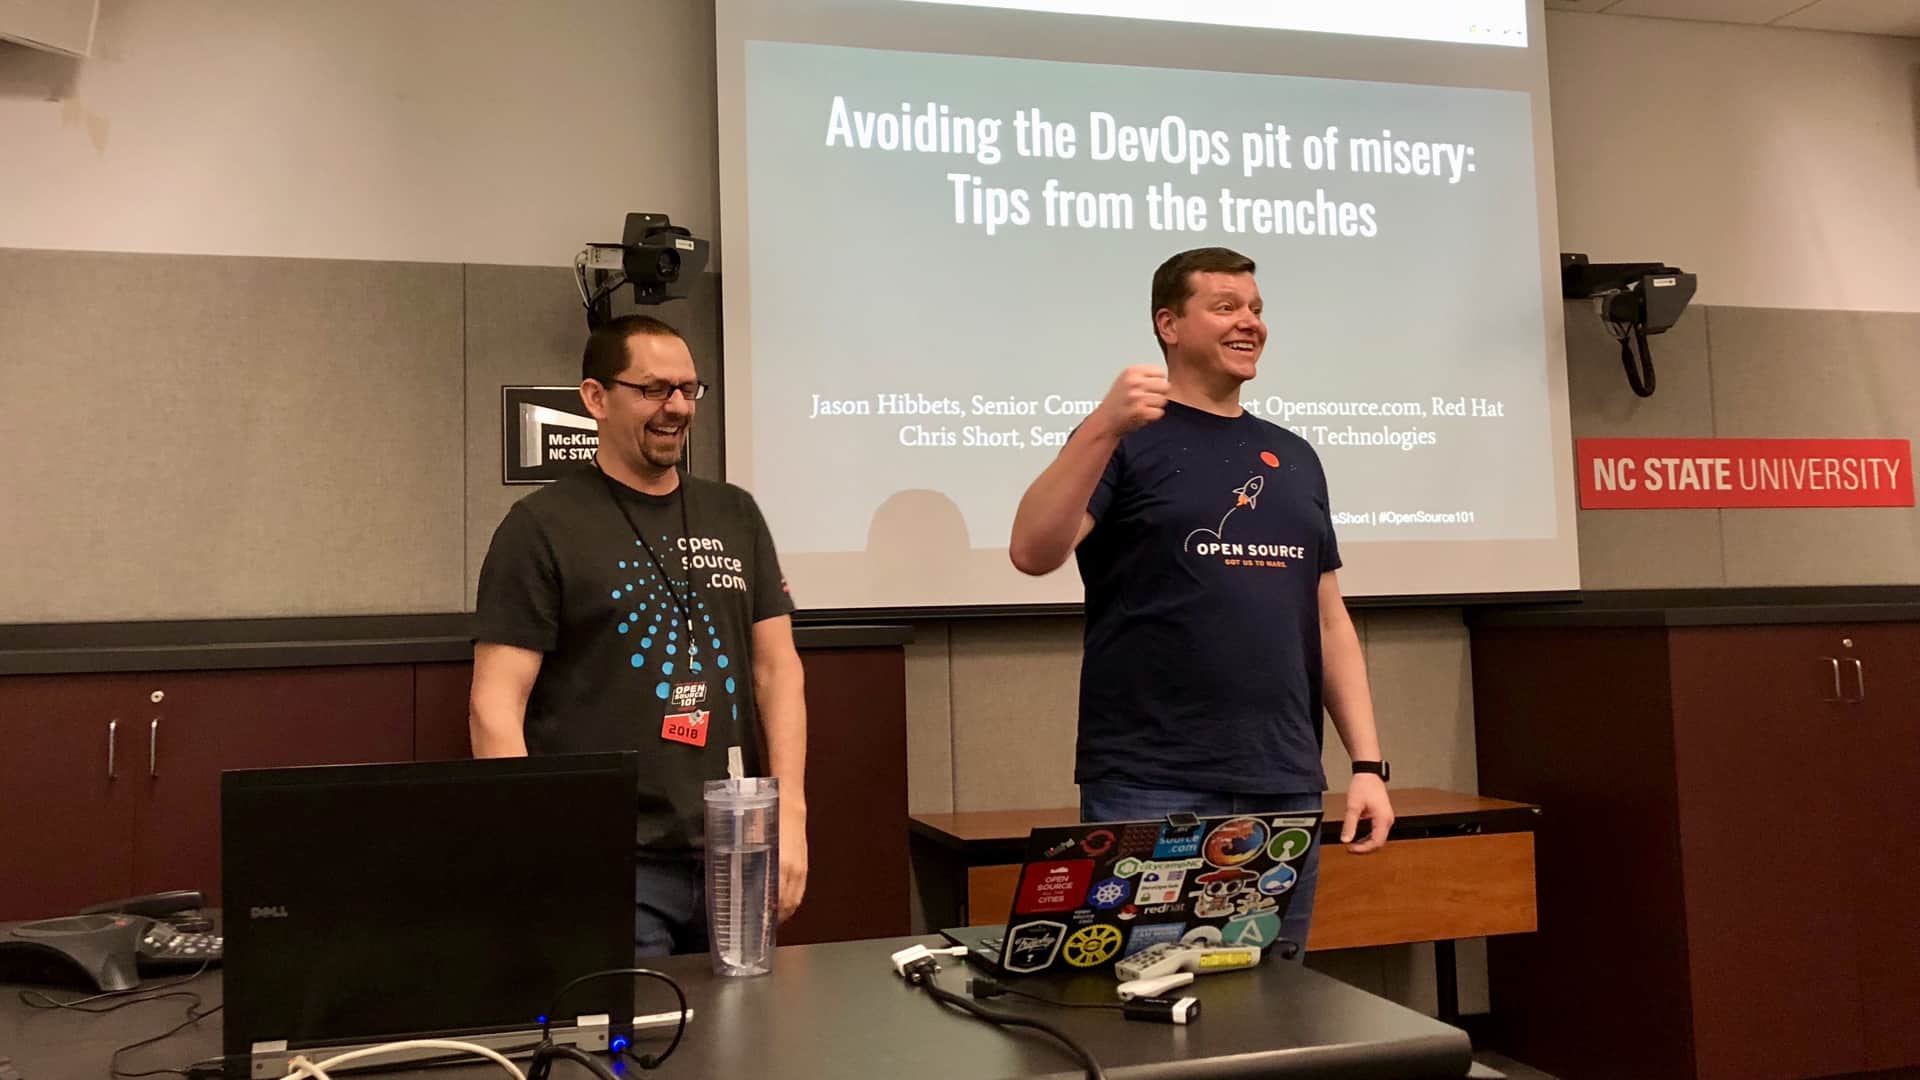 Jason Hibbets and Chris Short Talking DevOps at Open Source Raleigh 101